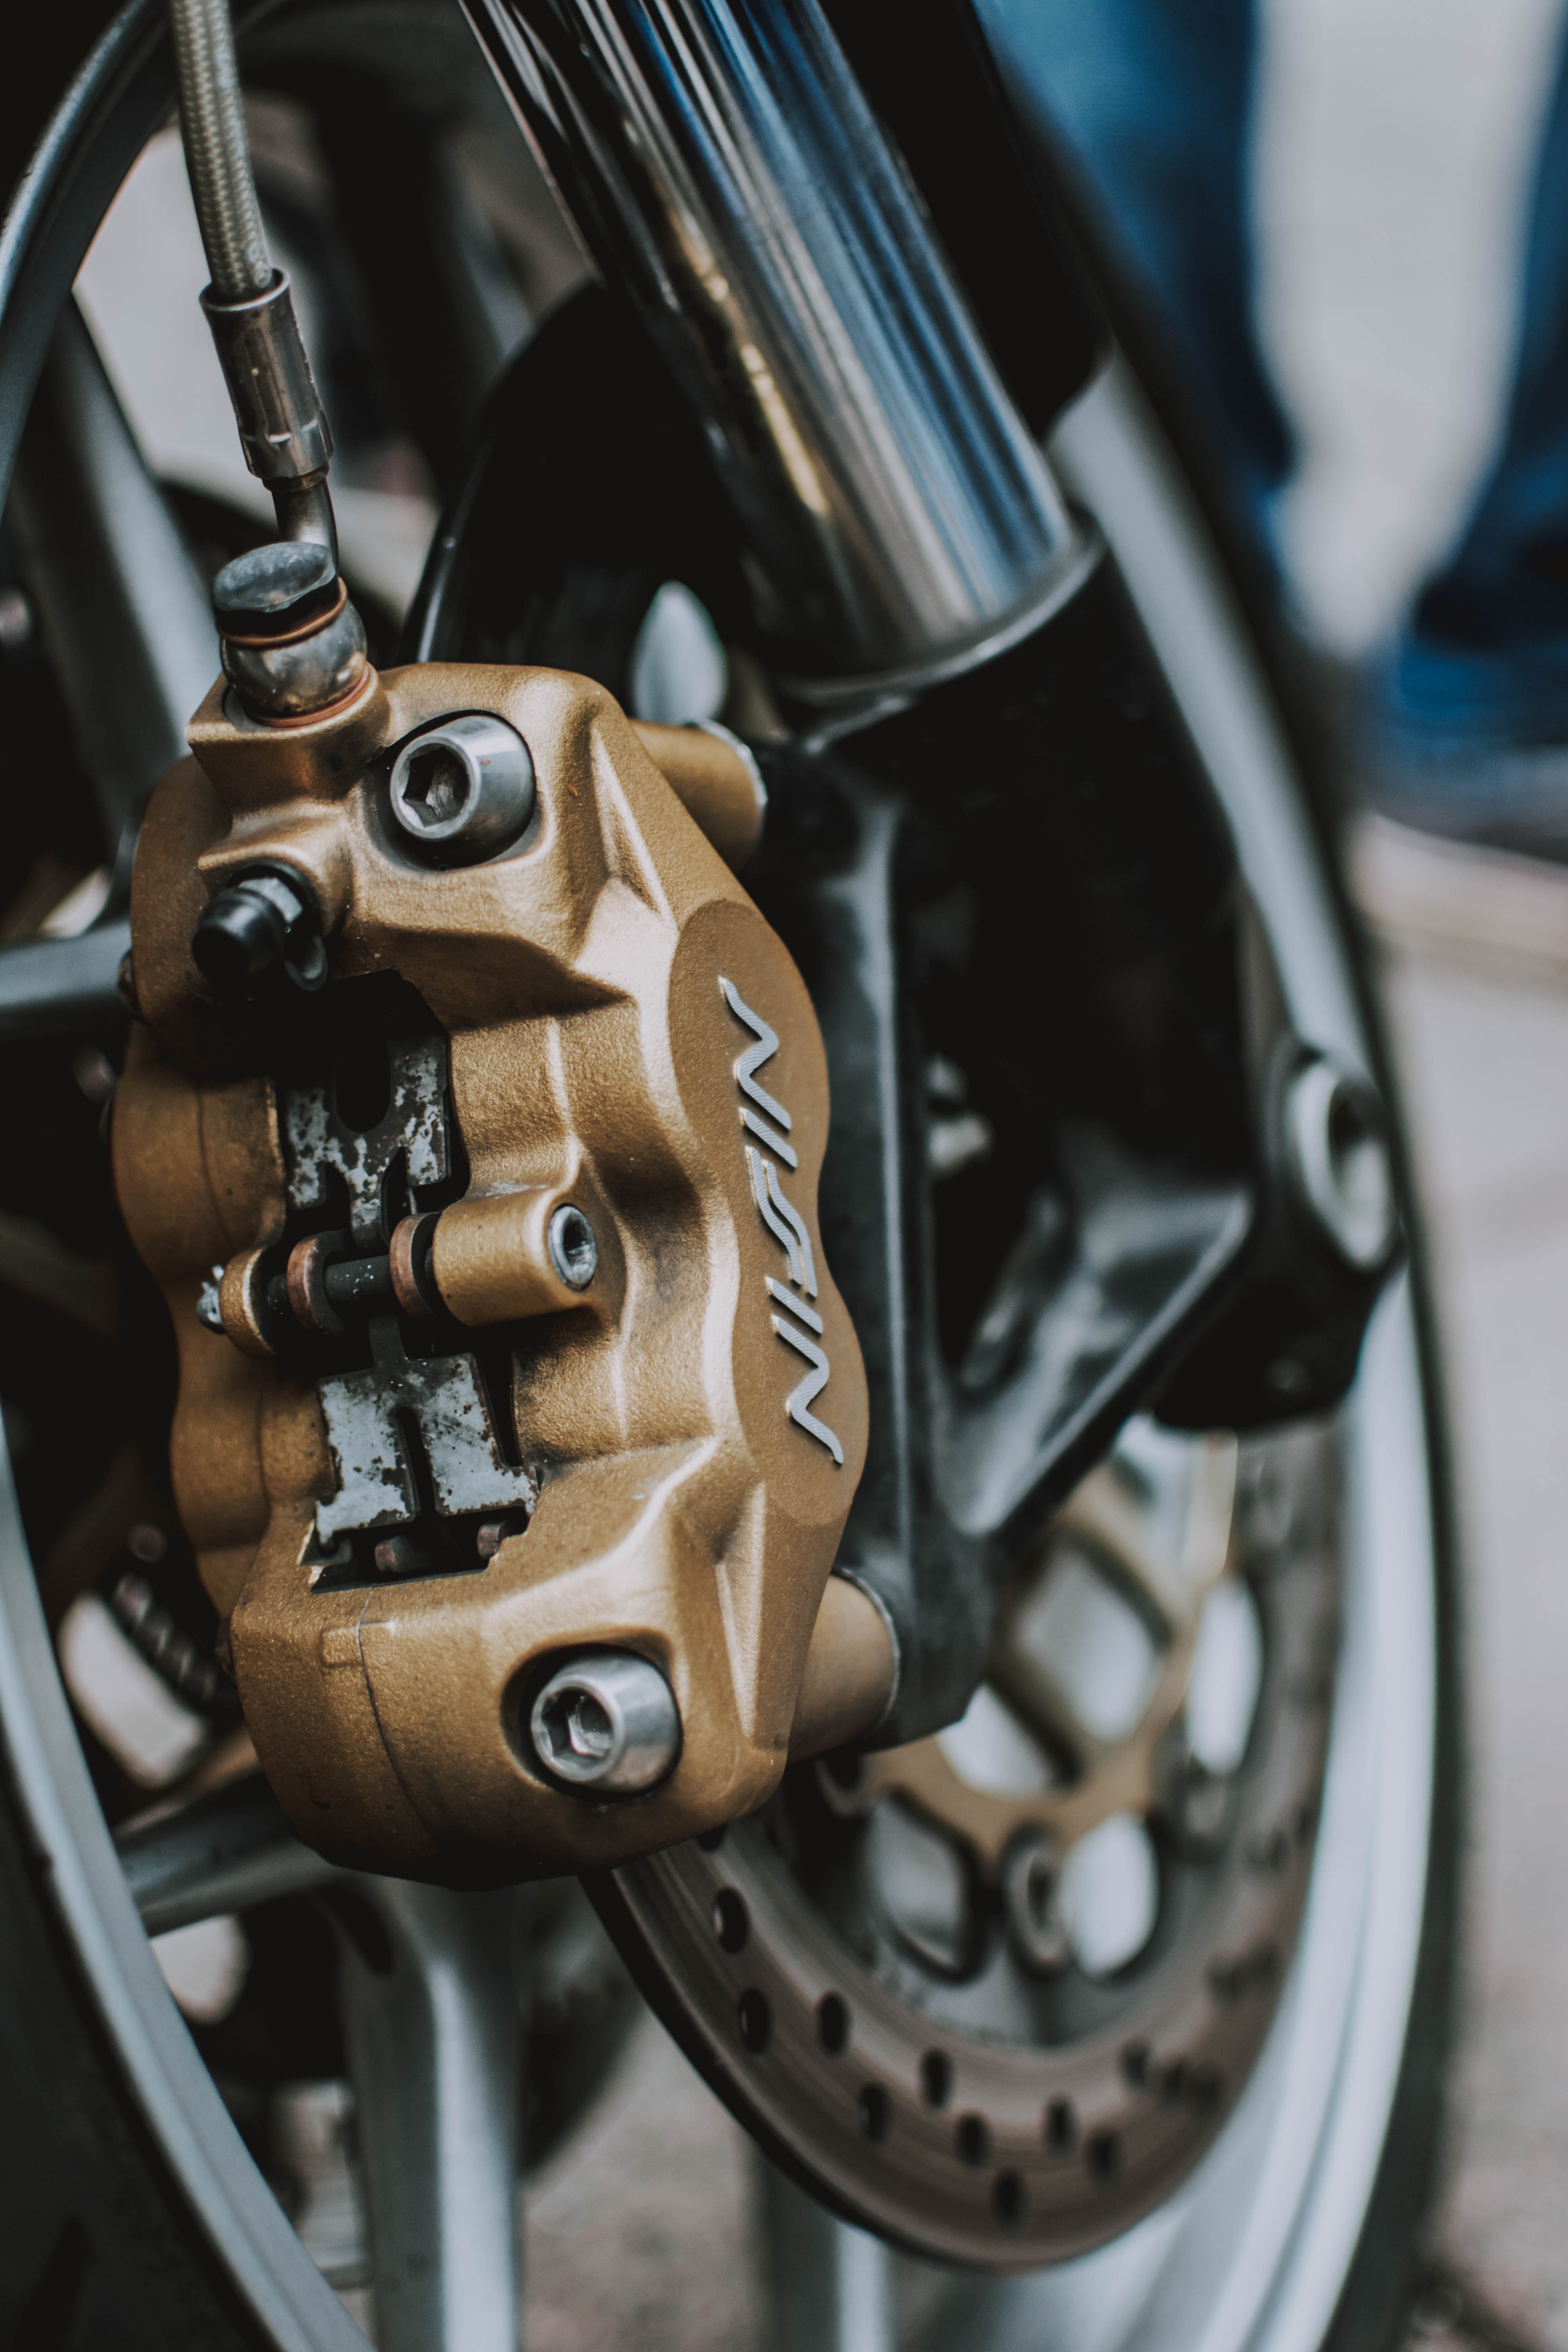 What is the safest braking method on a motorcycle?